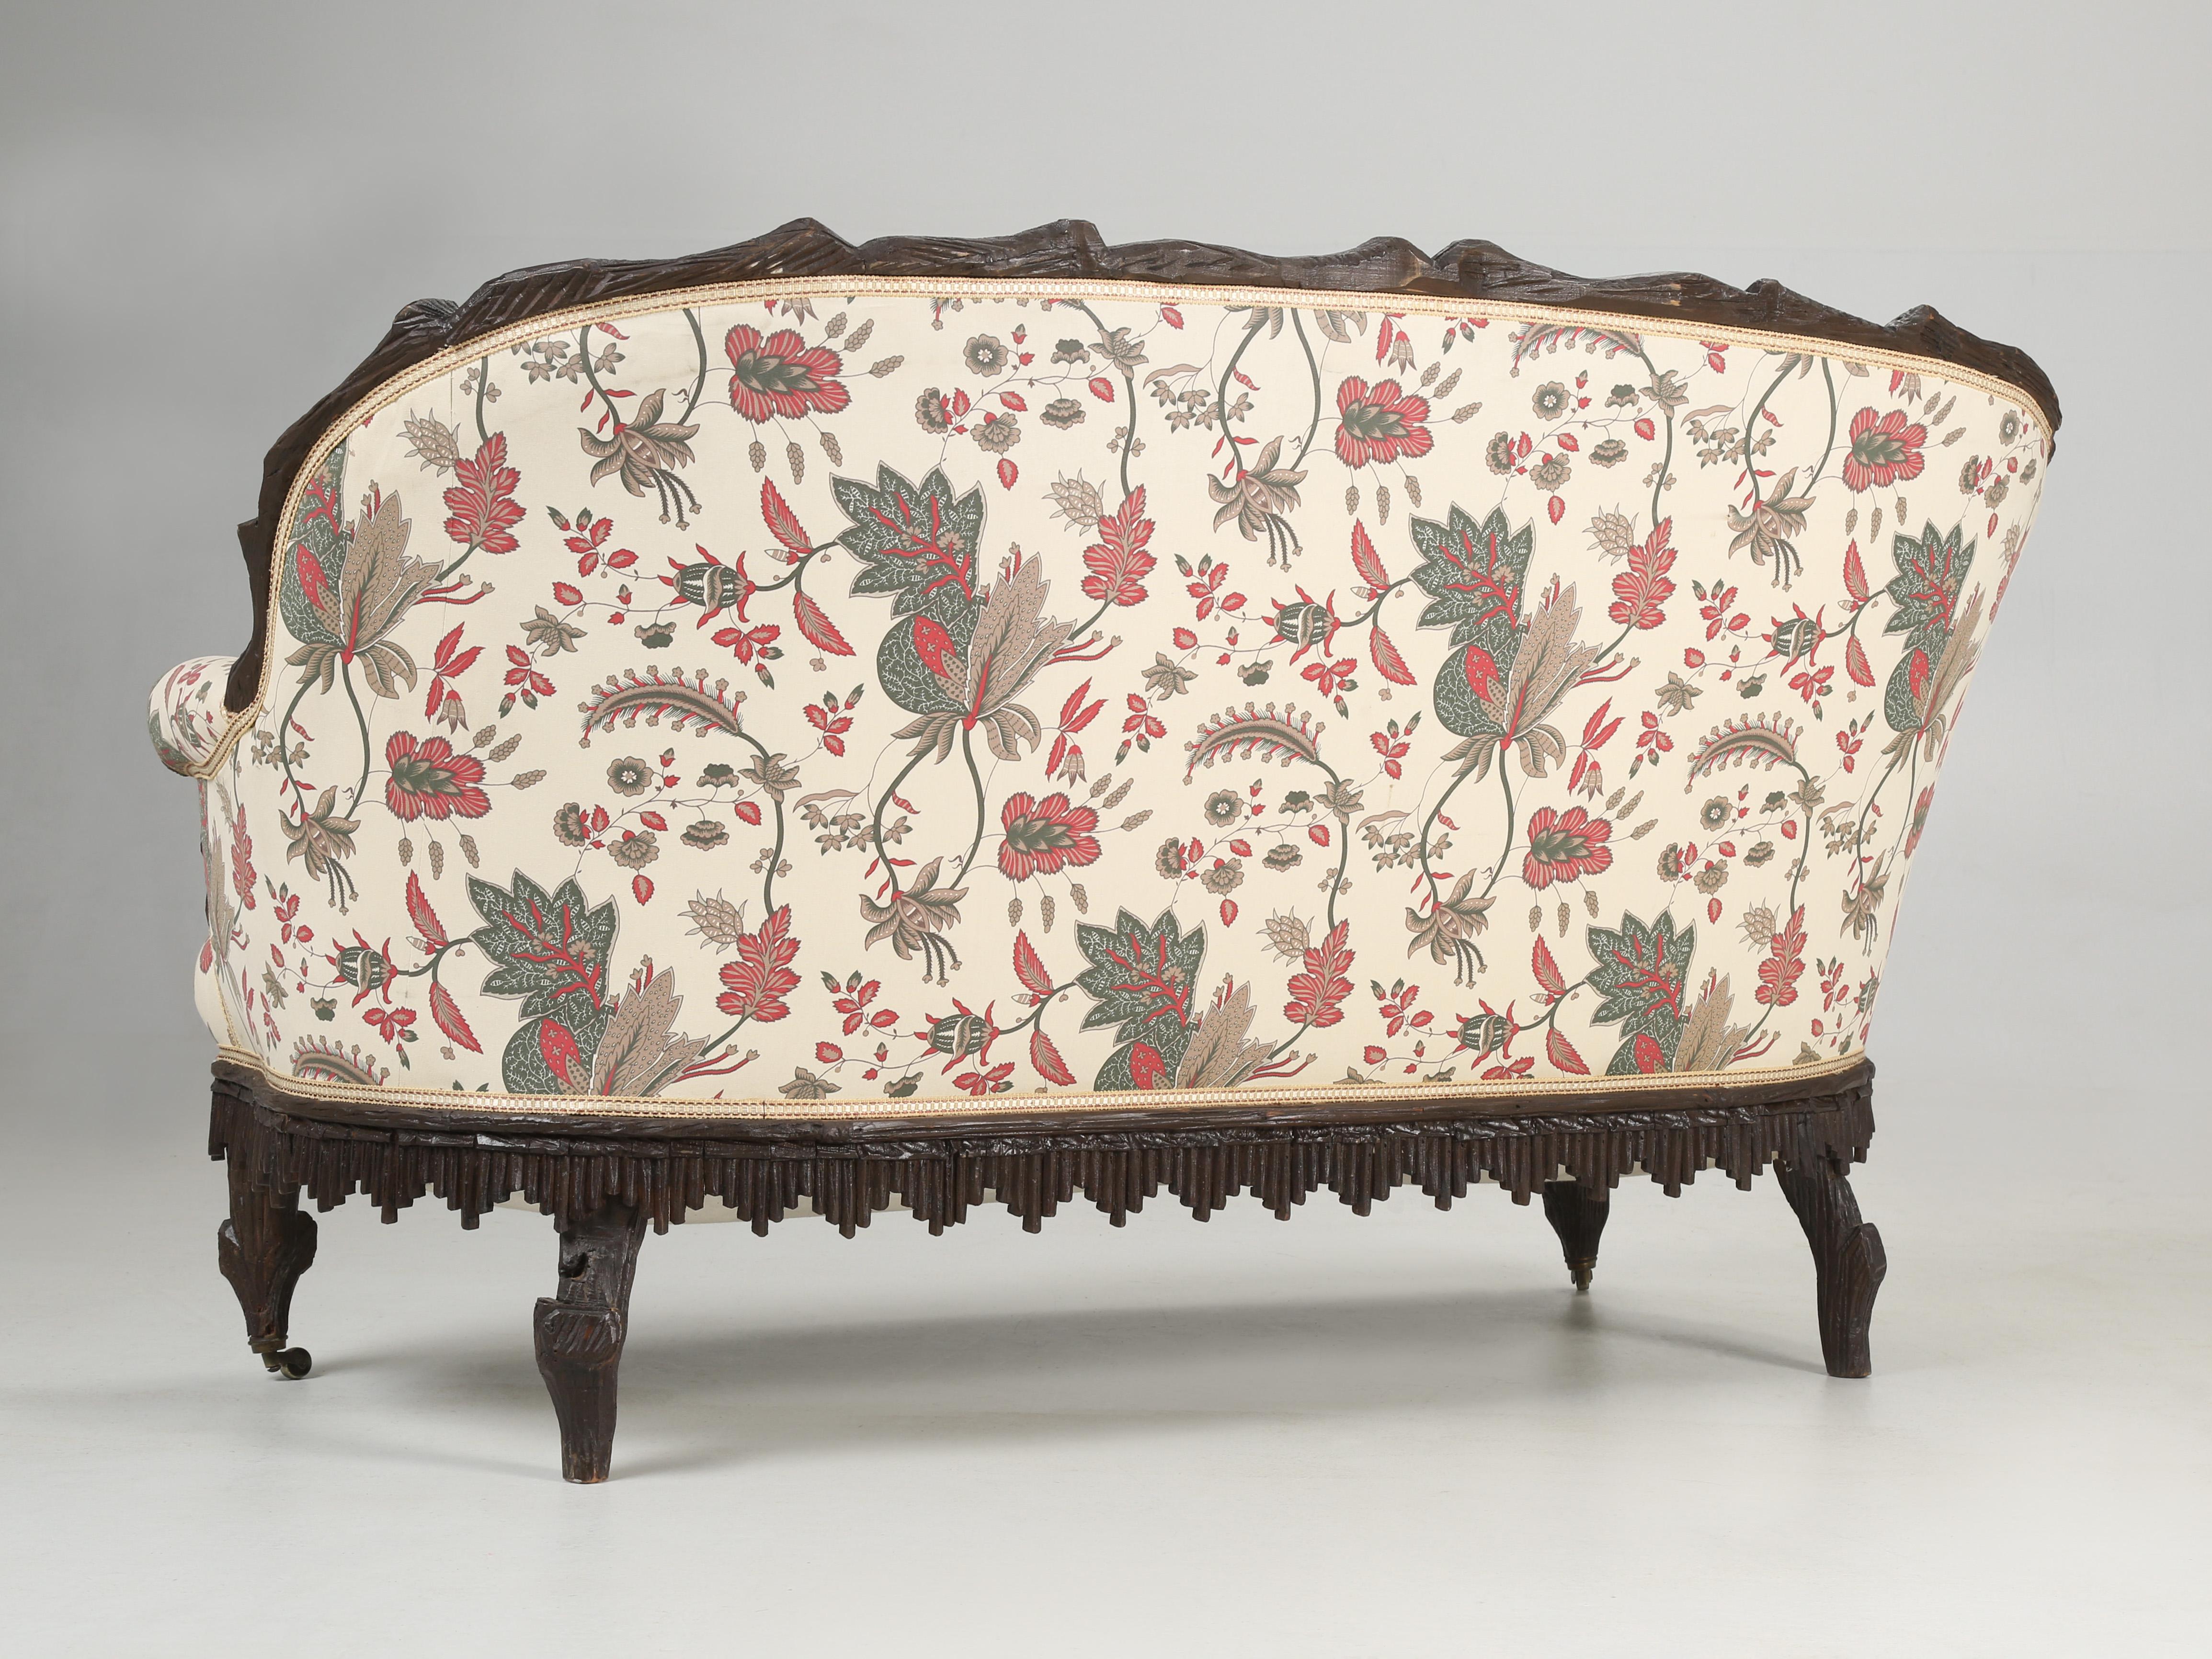 Antique Black Forest Sofa from French Chateau in the South of France, Restored For Sale 7